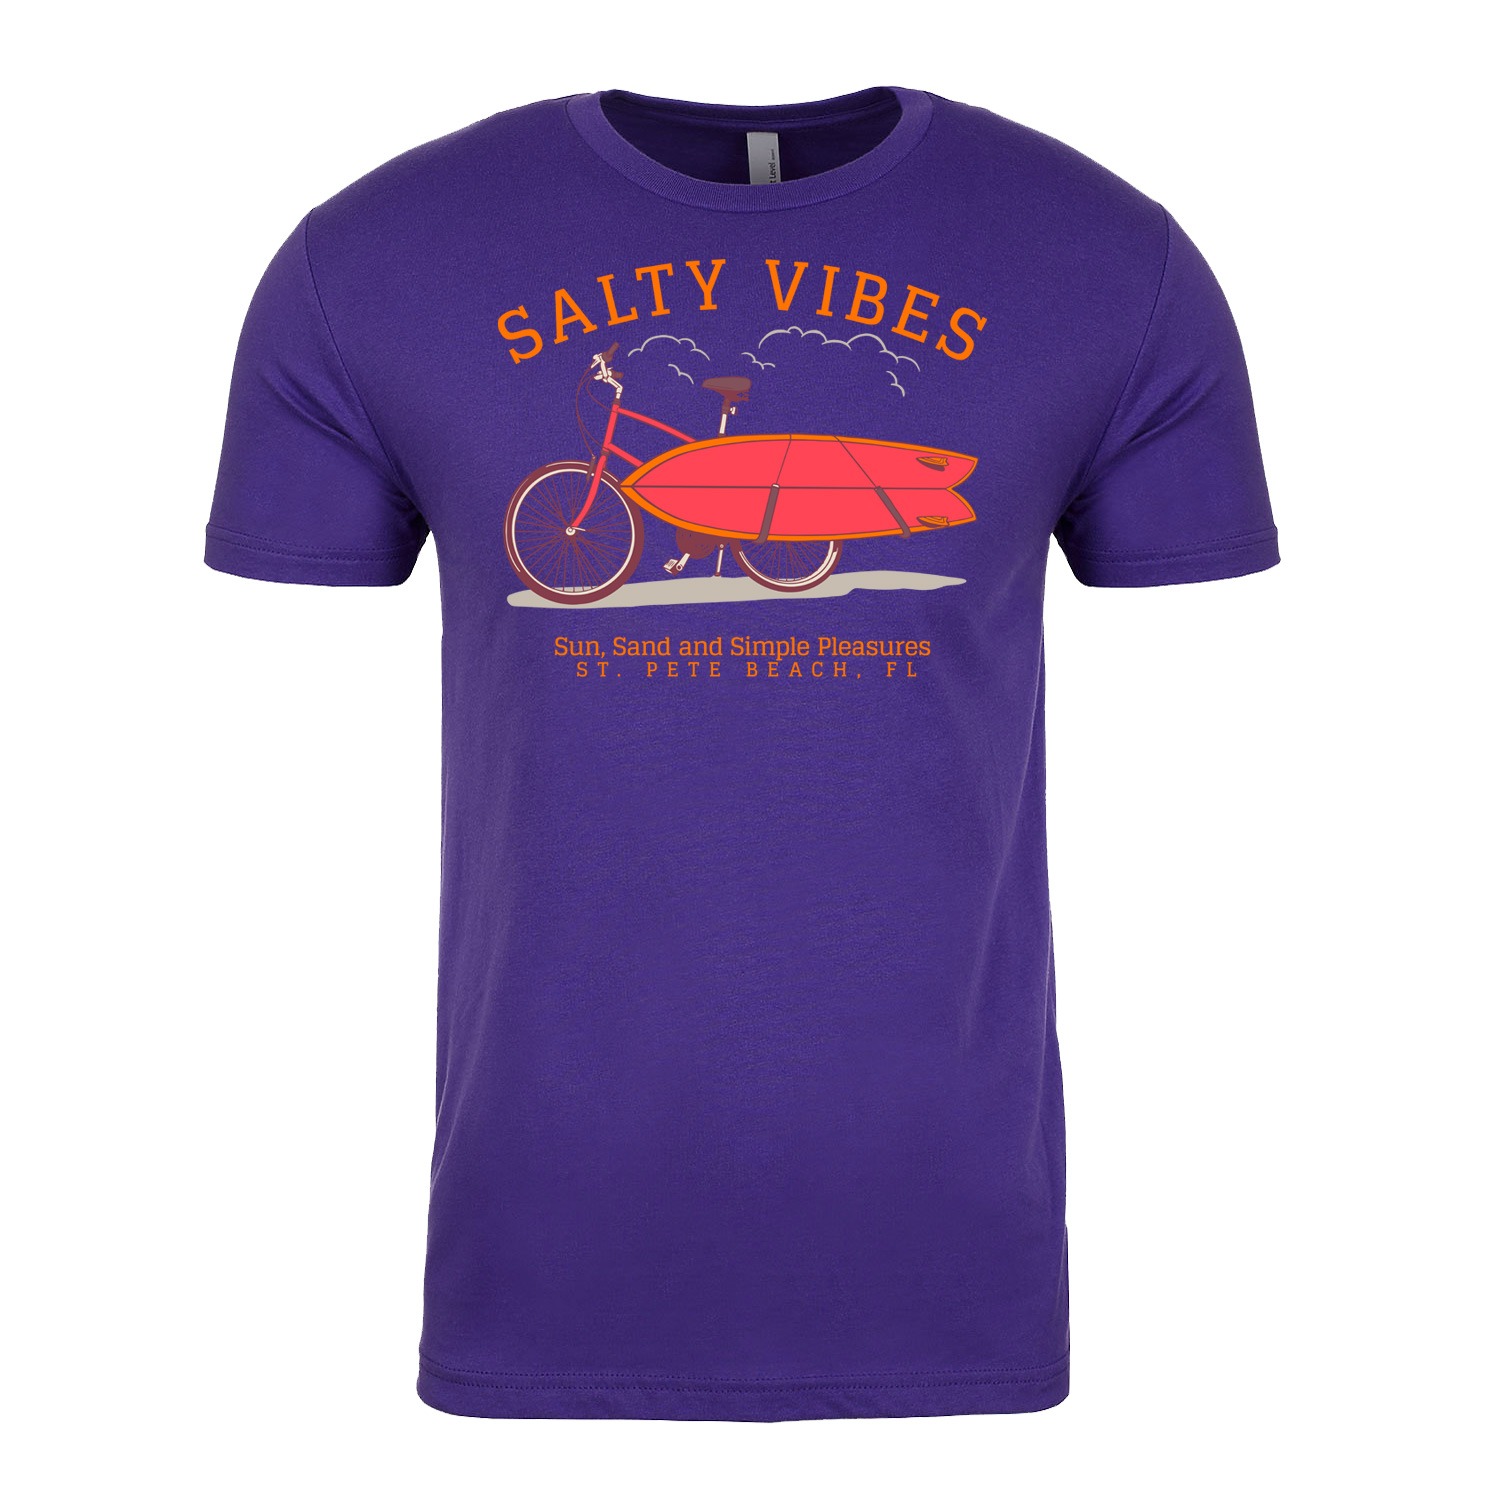 Salty Vibes Bicycle Unisex T-Shirt - Purple, 2XL